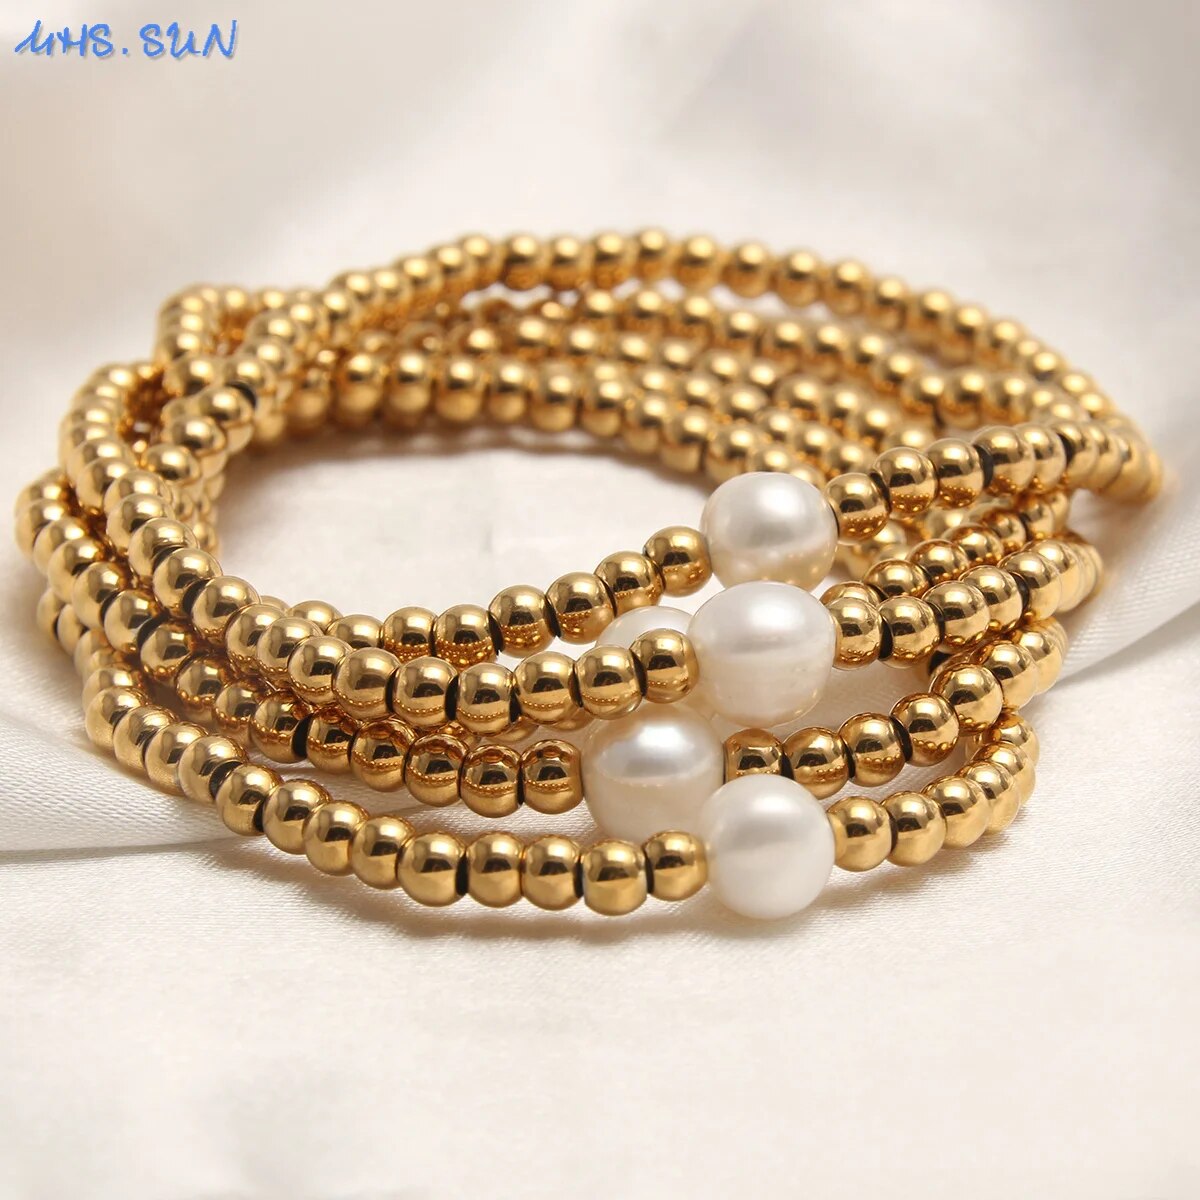 Golden Plated  Stainless Steel Elastic Rope Bracelet with Pearl  Bead Accent Women Bracelets